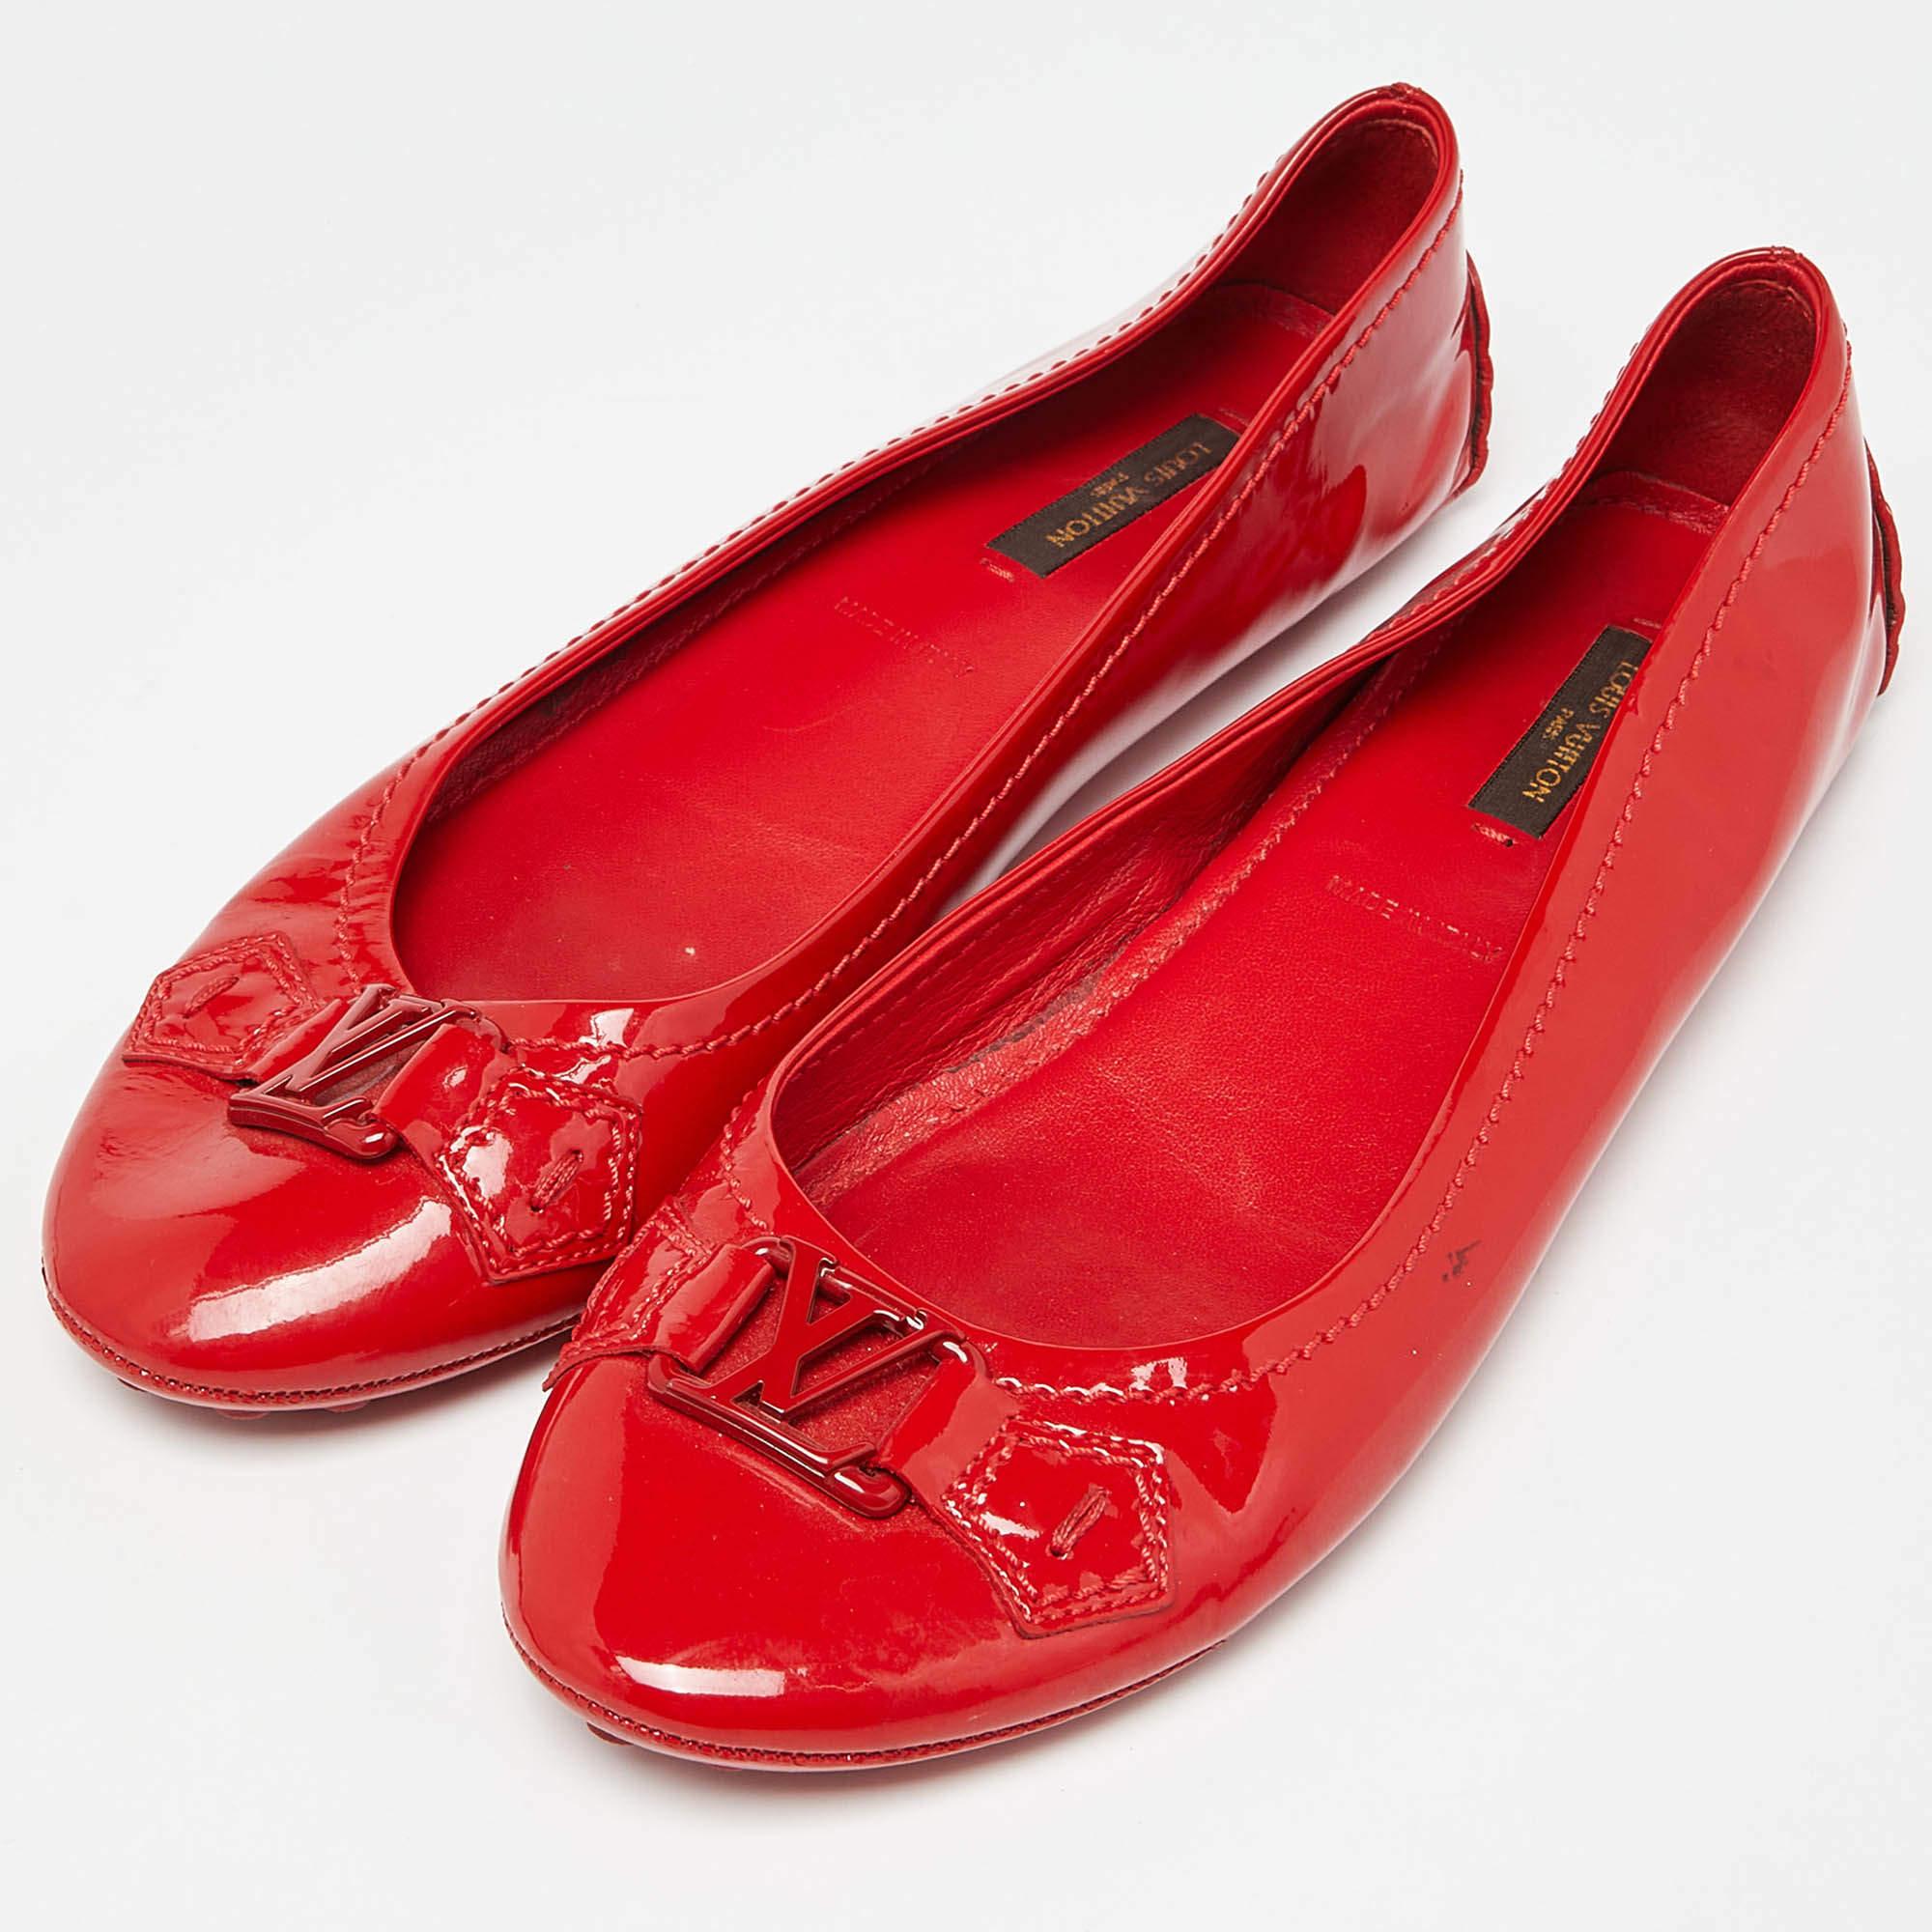 Louis Vuitton Red Patent Leather Oxford Ballet Flats Size 38 For Sale 1